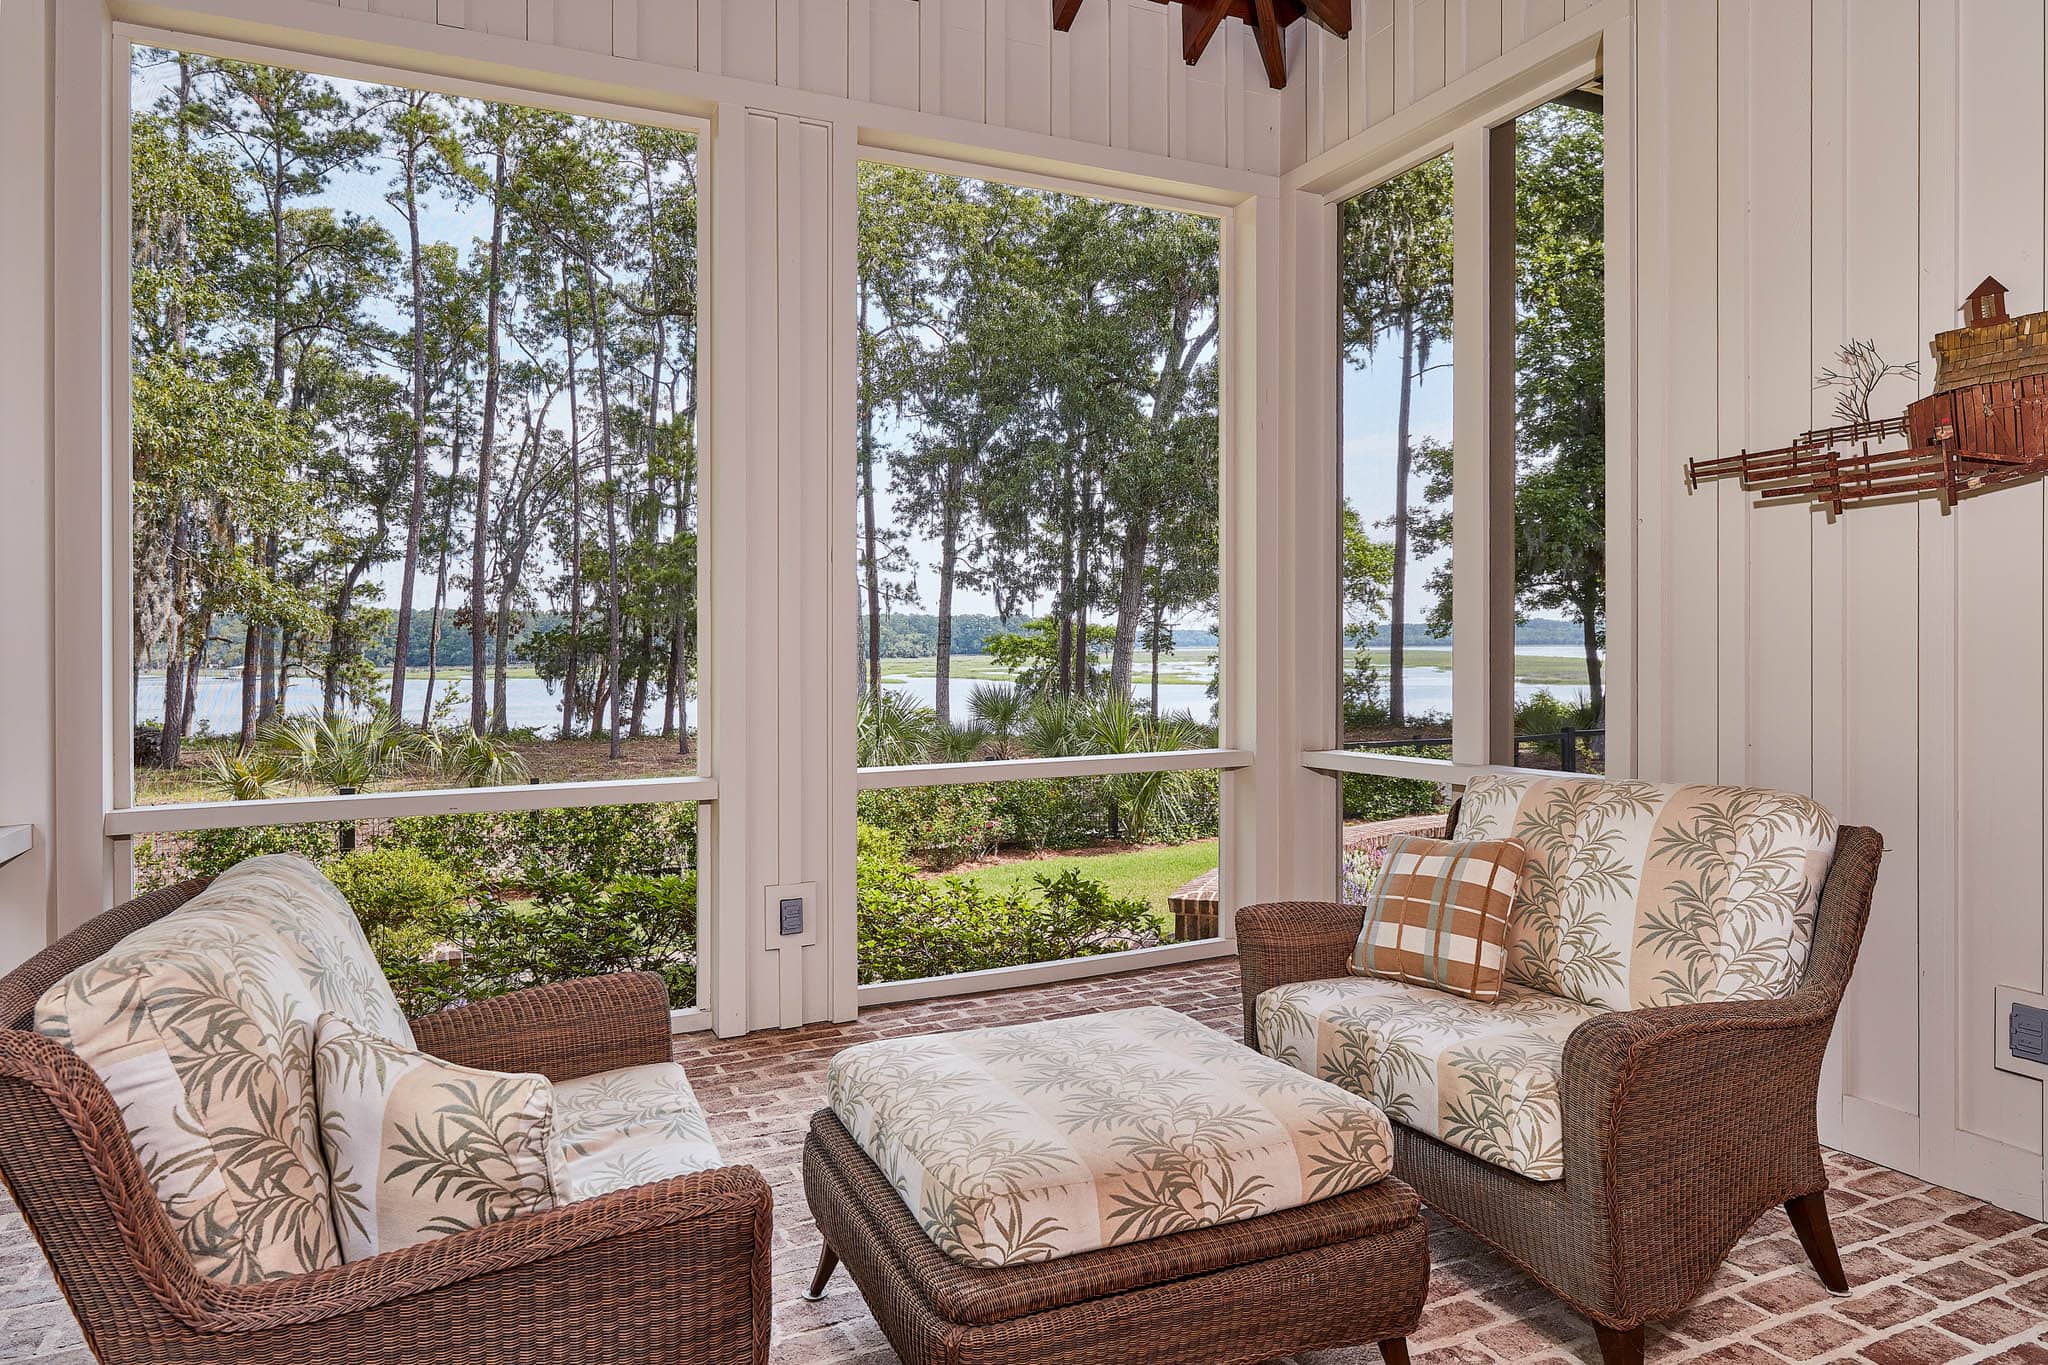 Screened in porch with chairs and overlooking lowcountry